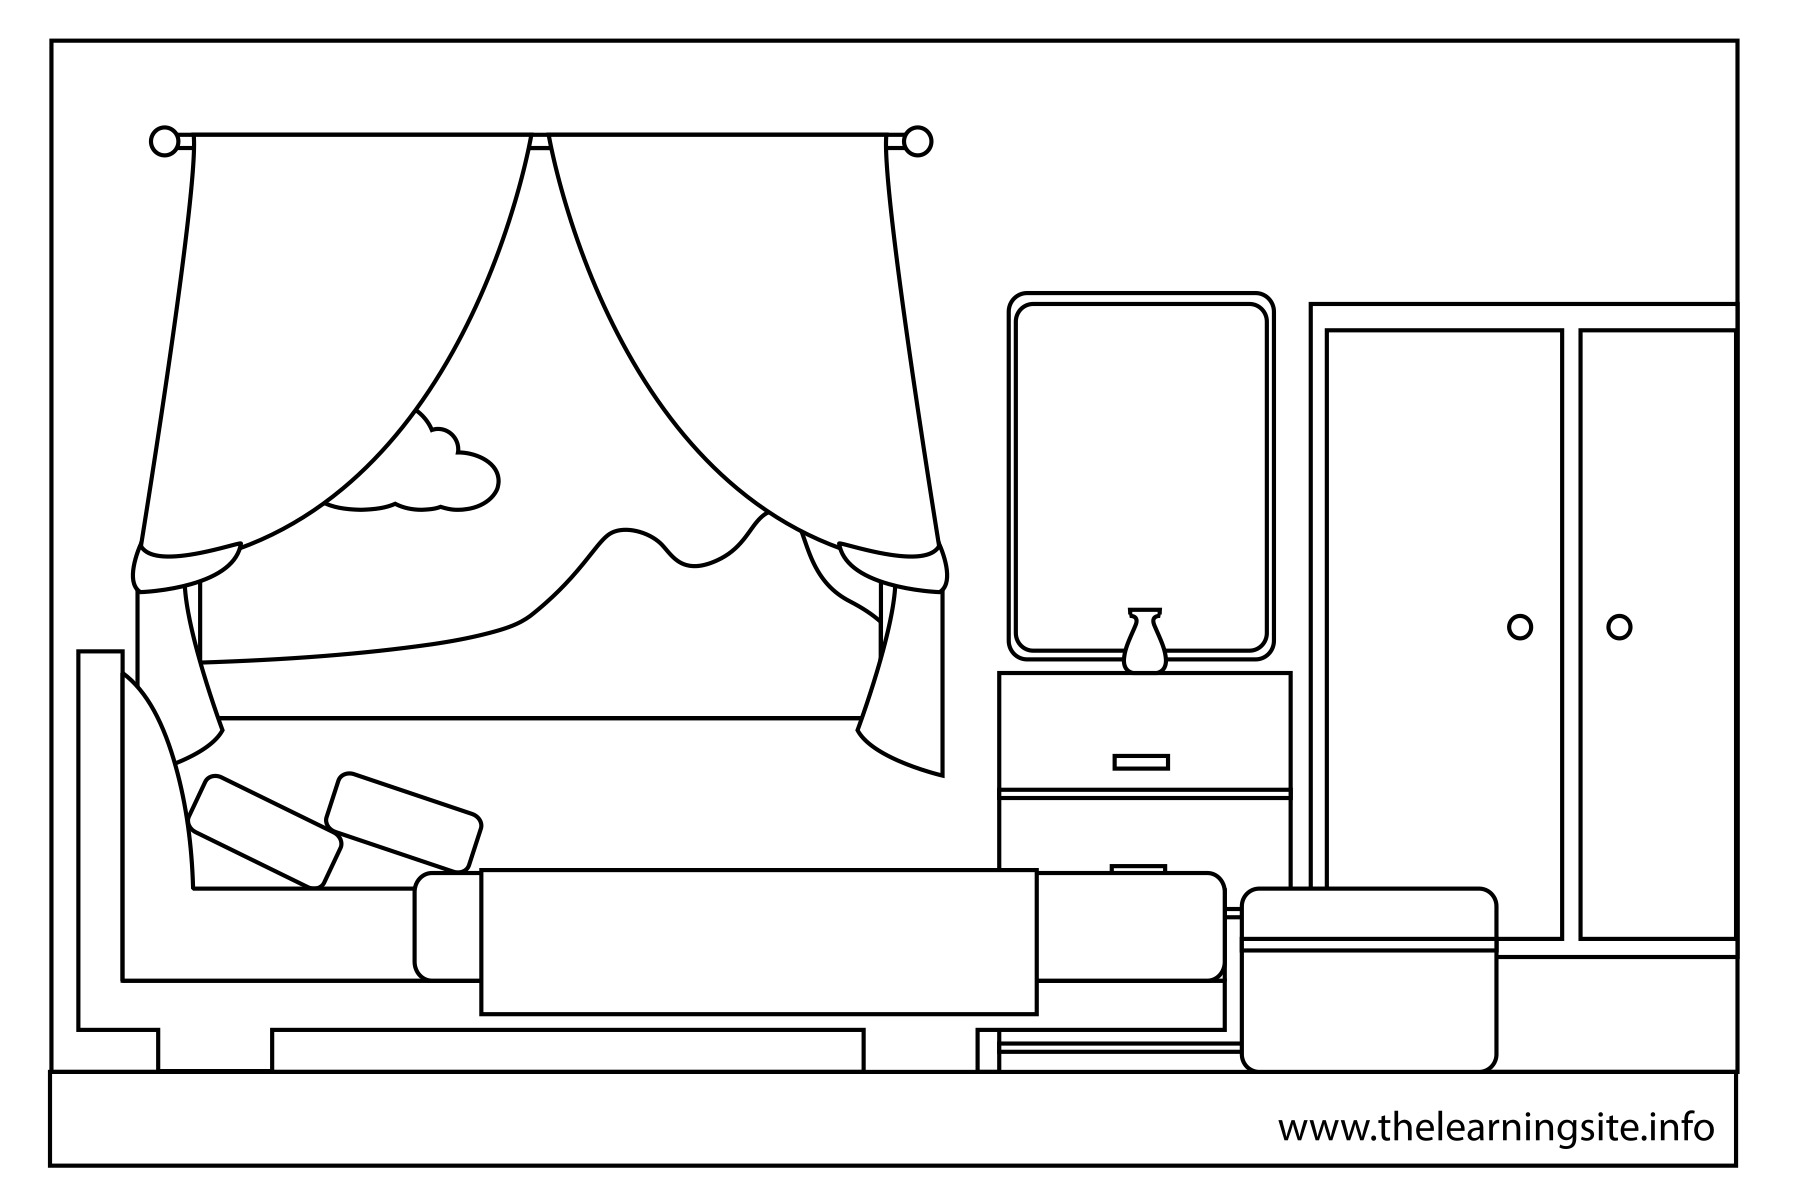 abc coloring pages sheets for adjustable beds - photo #23